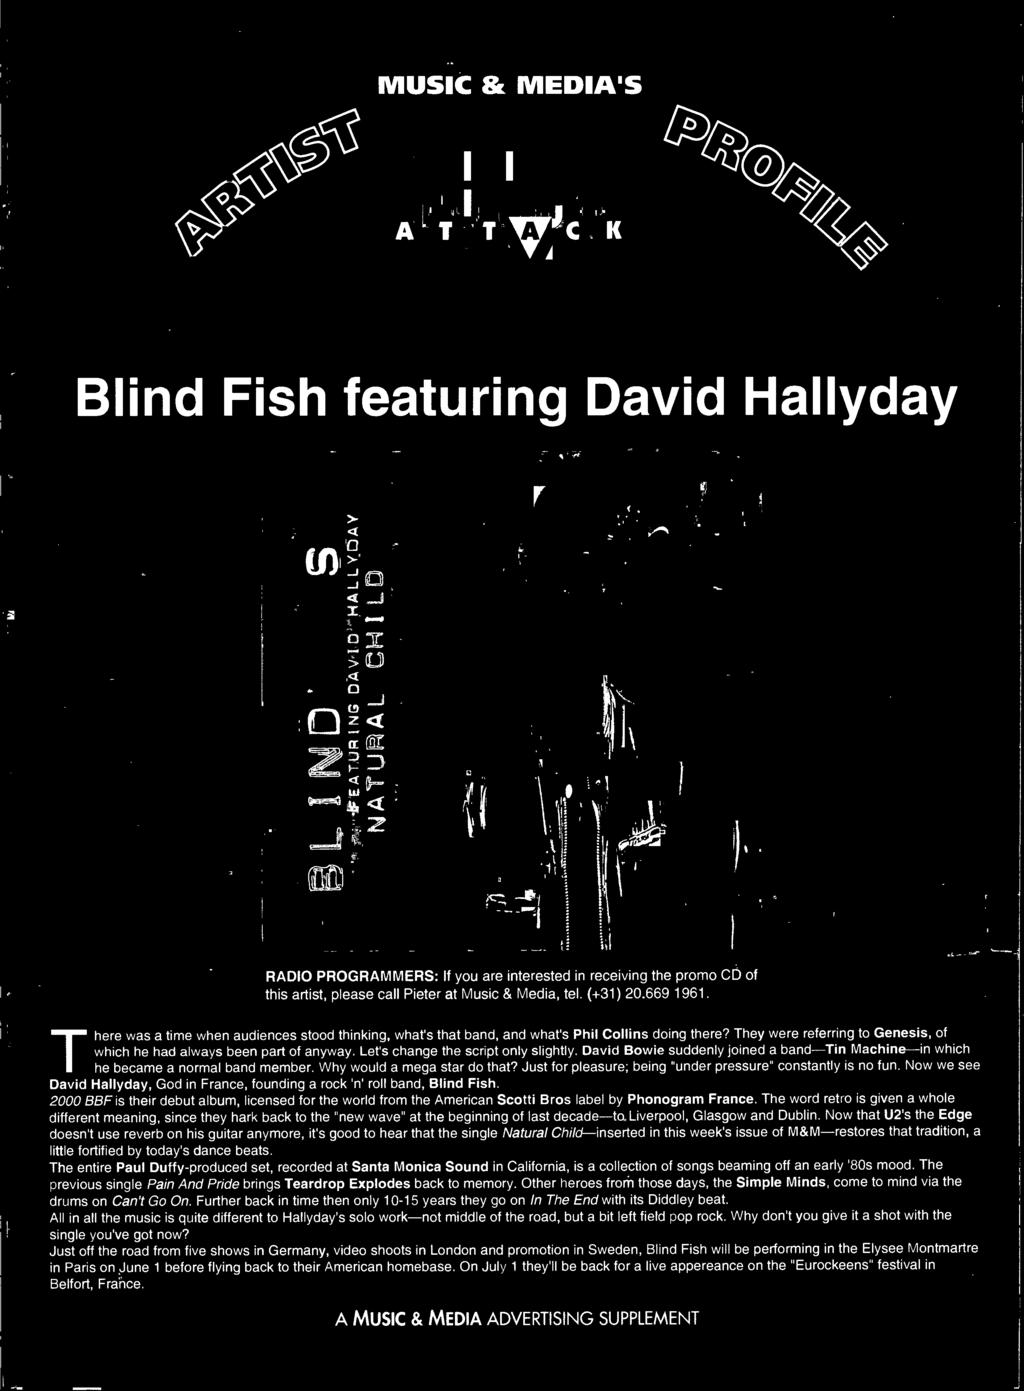 Now we see David Hallyday, God in France, founding a rock 'n' roll band, Blind Fish 2000 BBF is their debut album, licensed for the world from the American Scotti Bros label by honogram France.